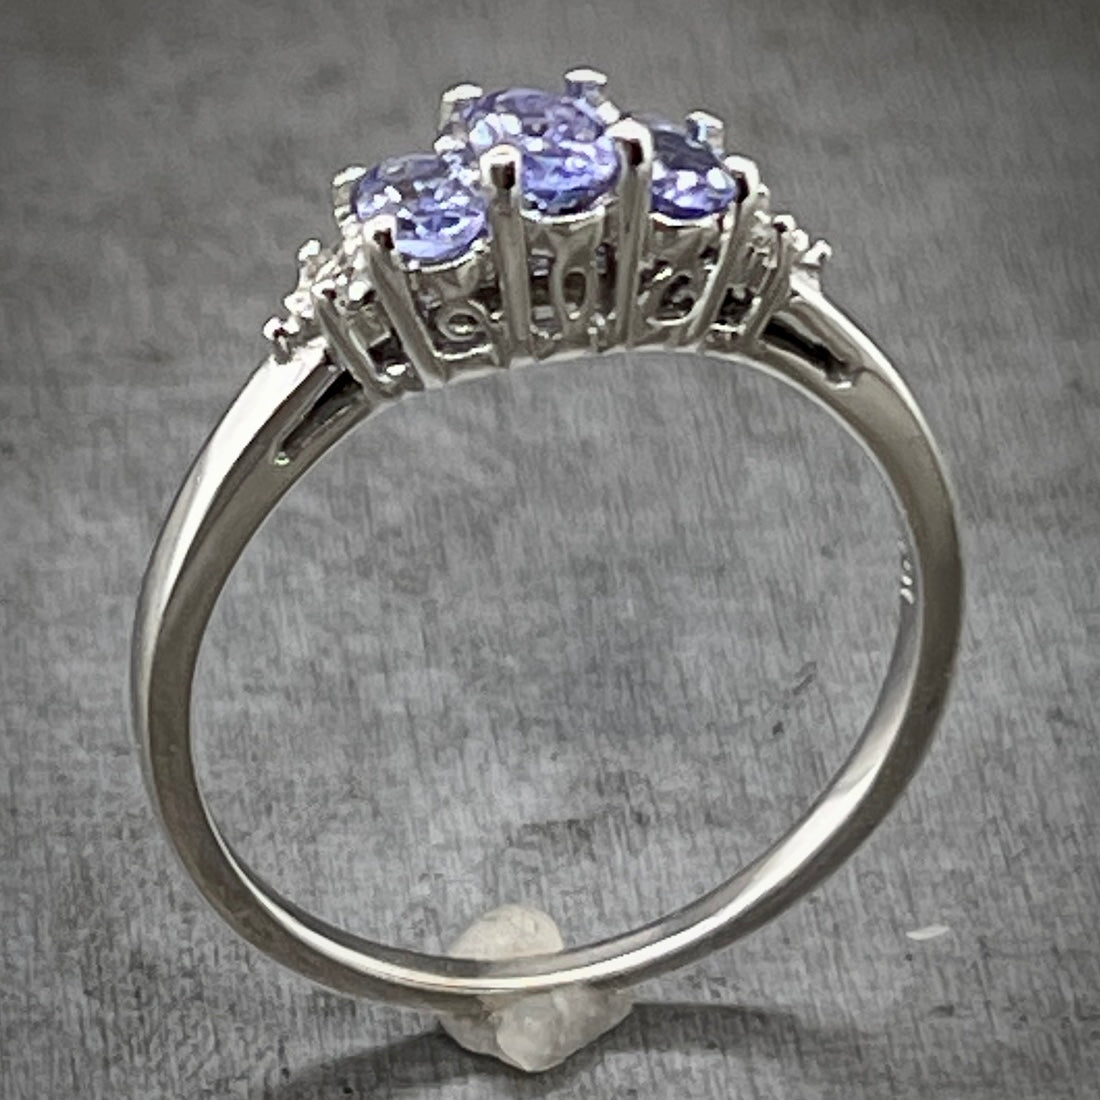 Angled aerial view of white gold tanzanite ring. Here you can better see the head of the ring and its intricate design that showcases a motif of cut out portions of a swirling design.